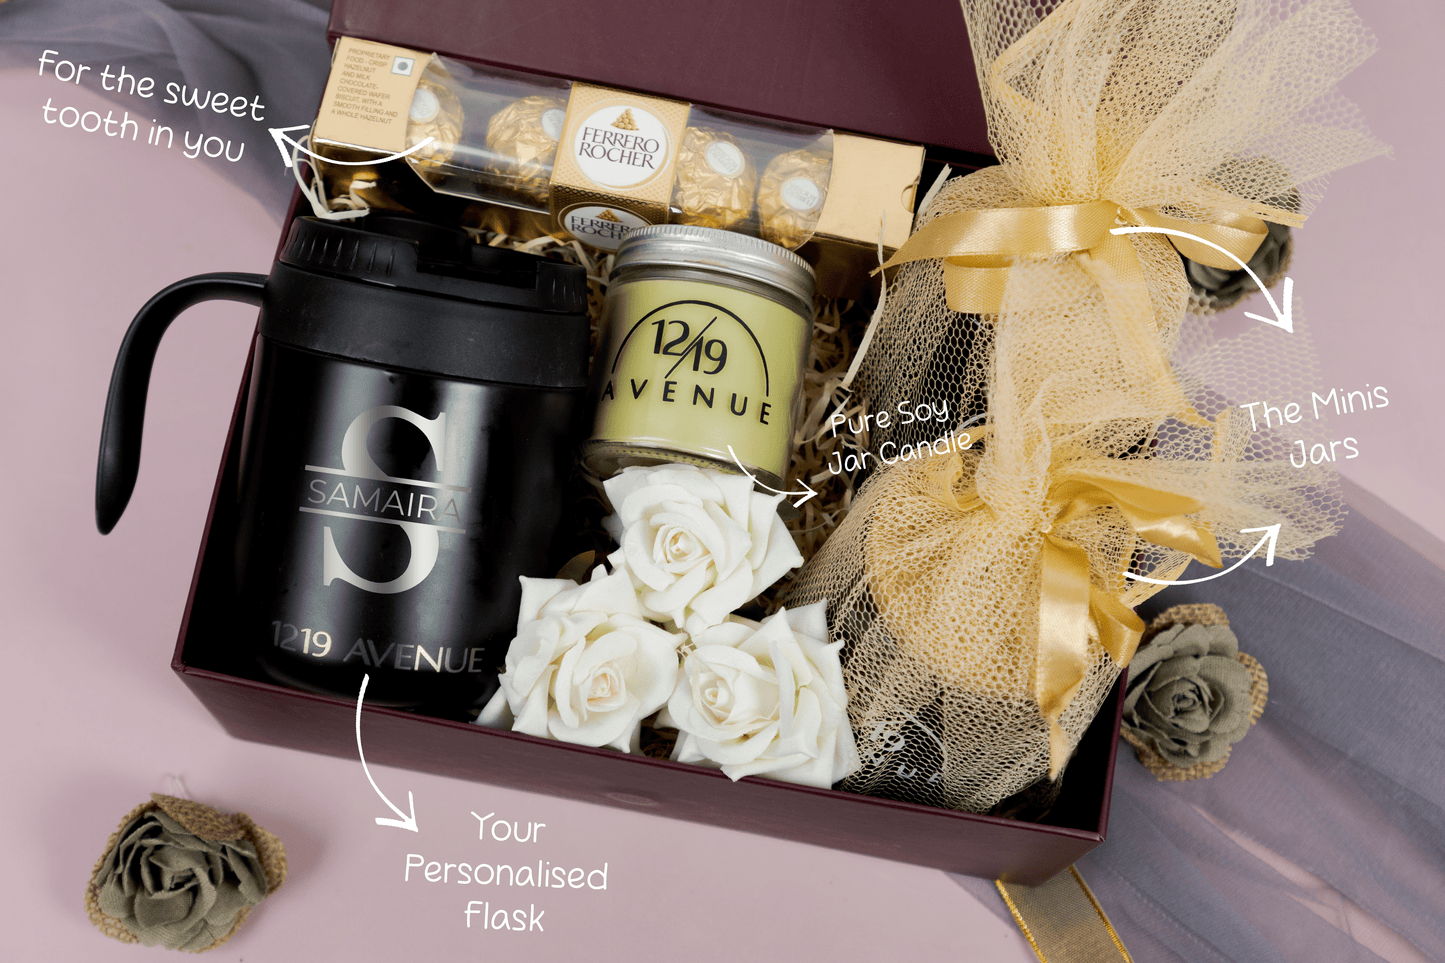 The Golden Glow Gourmet Personalized Gifting Hamper